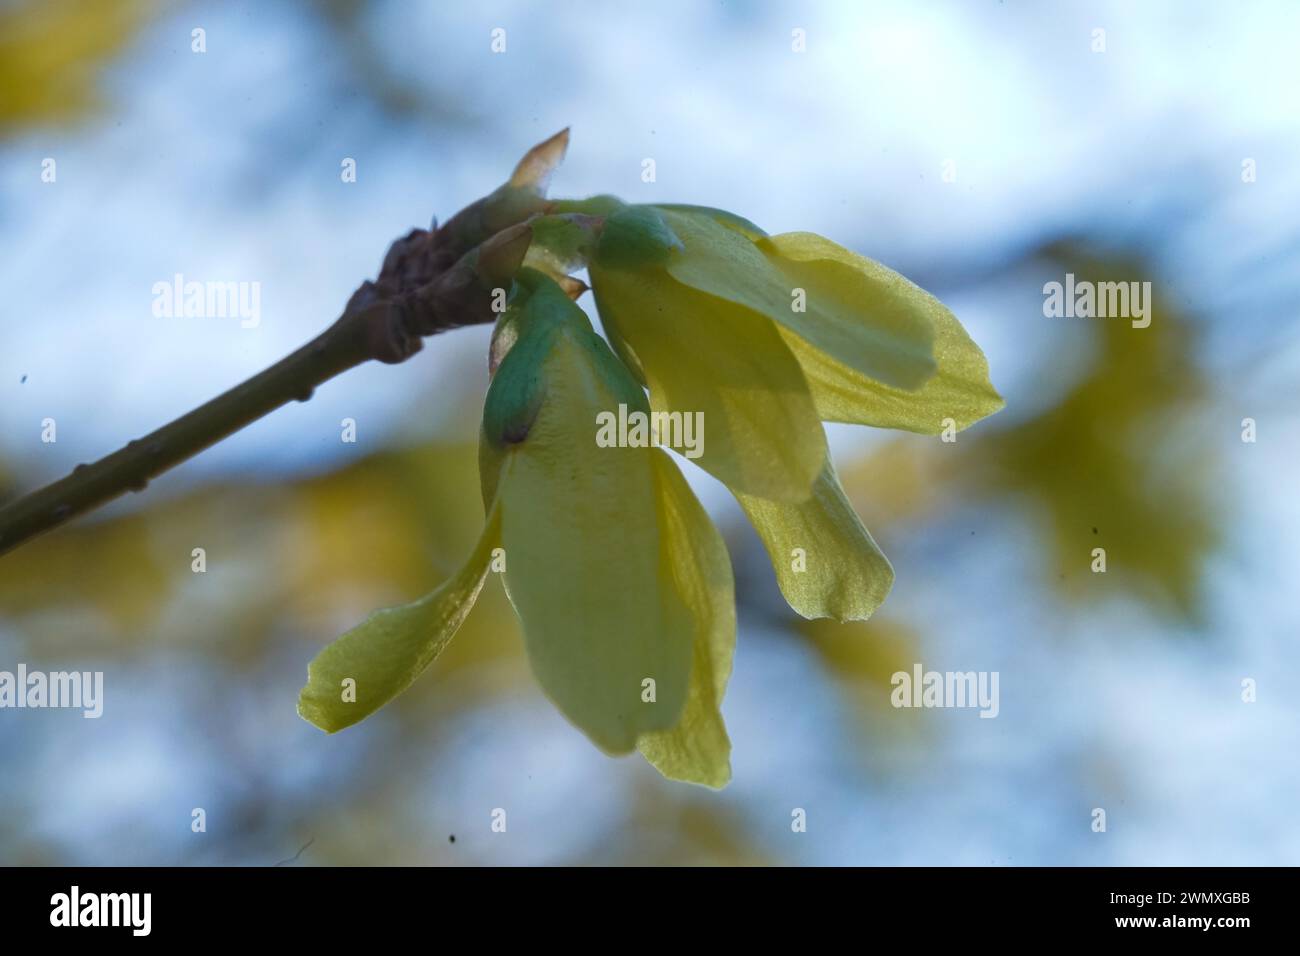 Macro shot of a yellow flower on a branch with a blurred blue-green background Forsythia Oleaceae Stock Photo